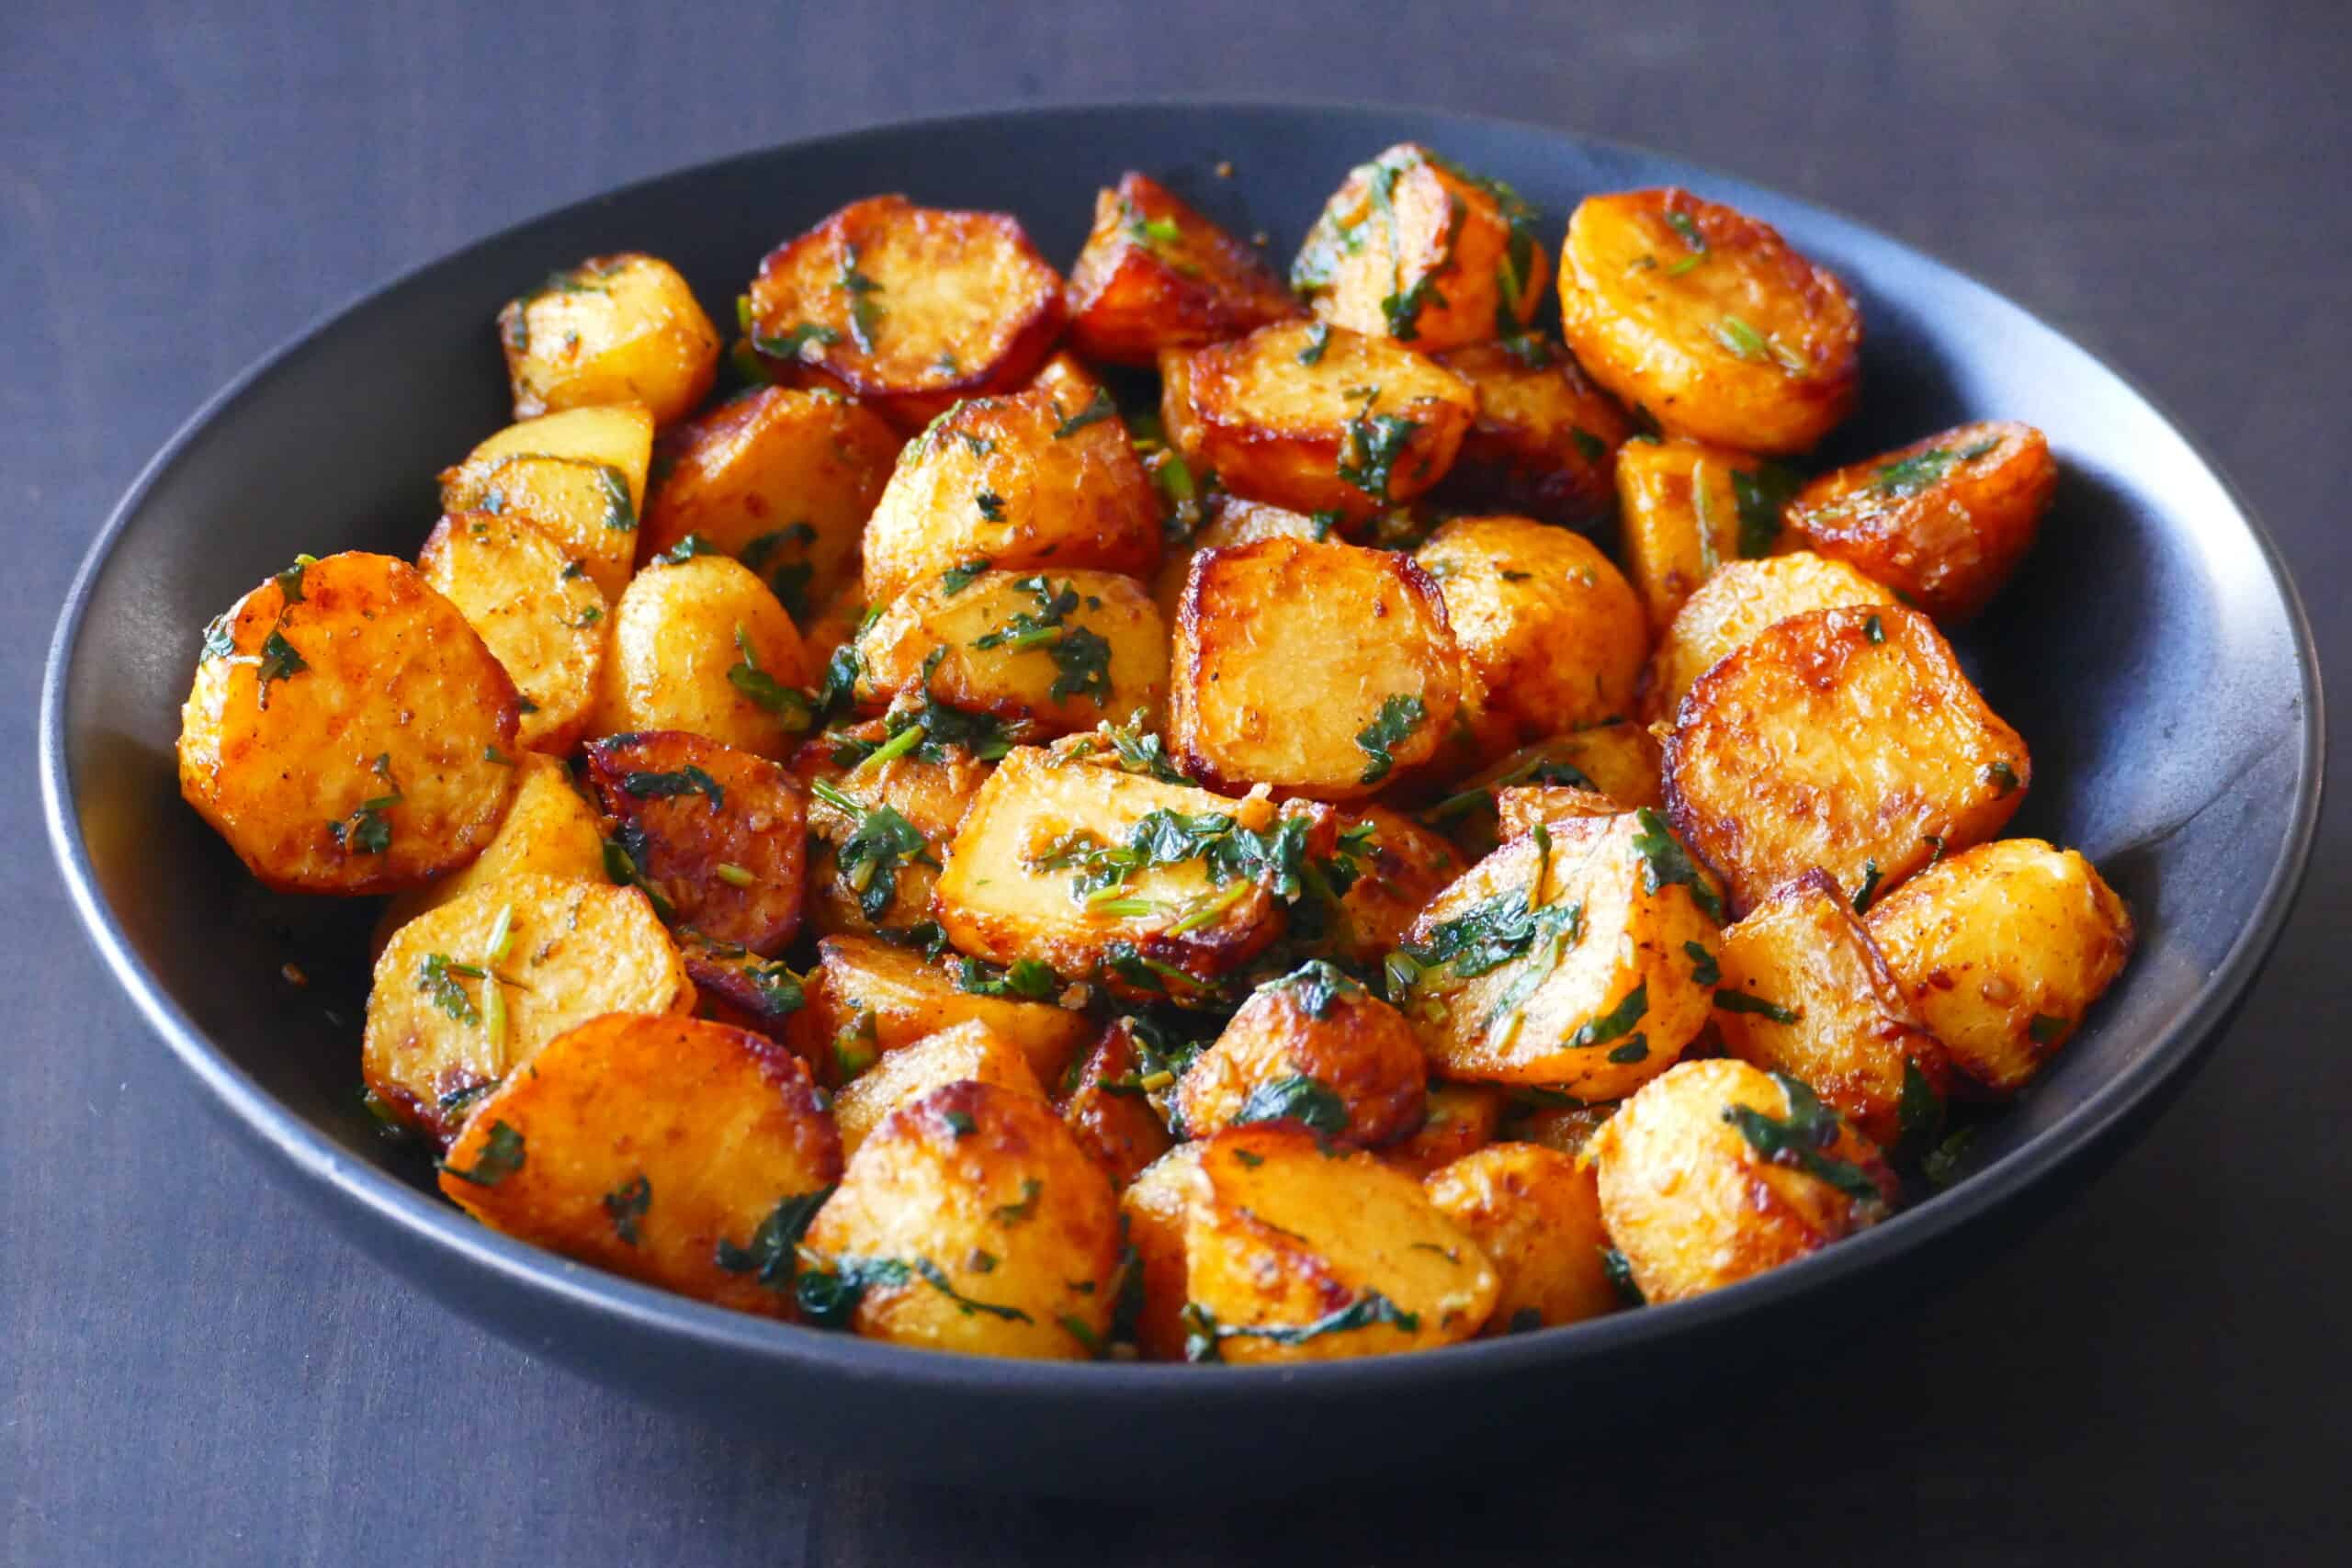 Black bowl with golden roasted potatoes coated with cilantro sauce